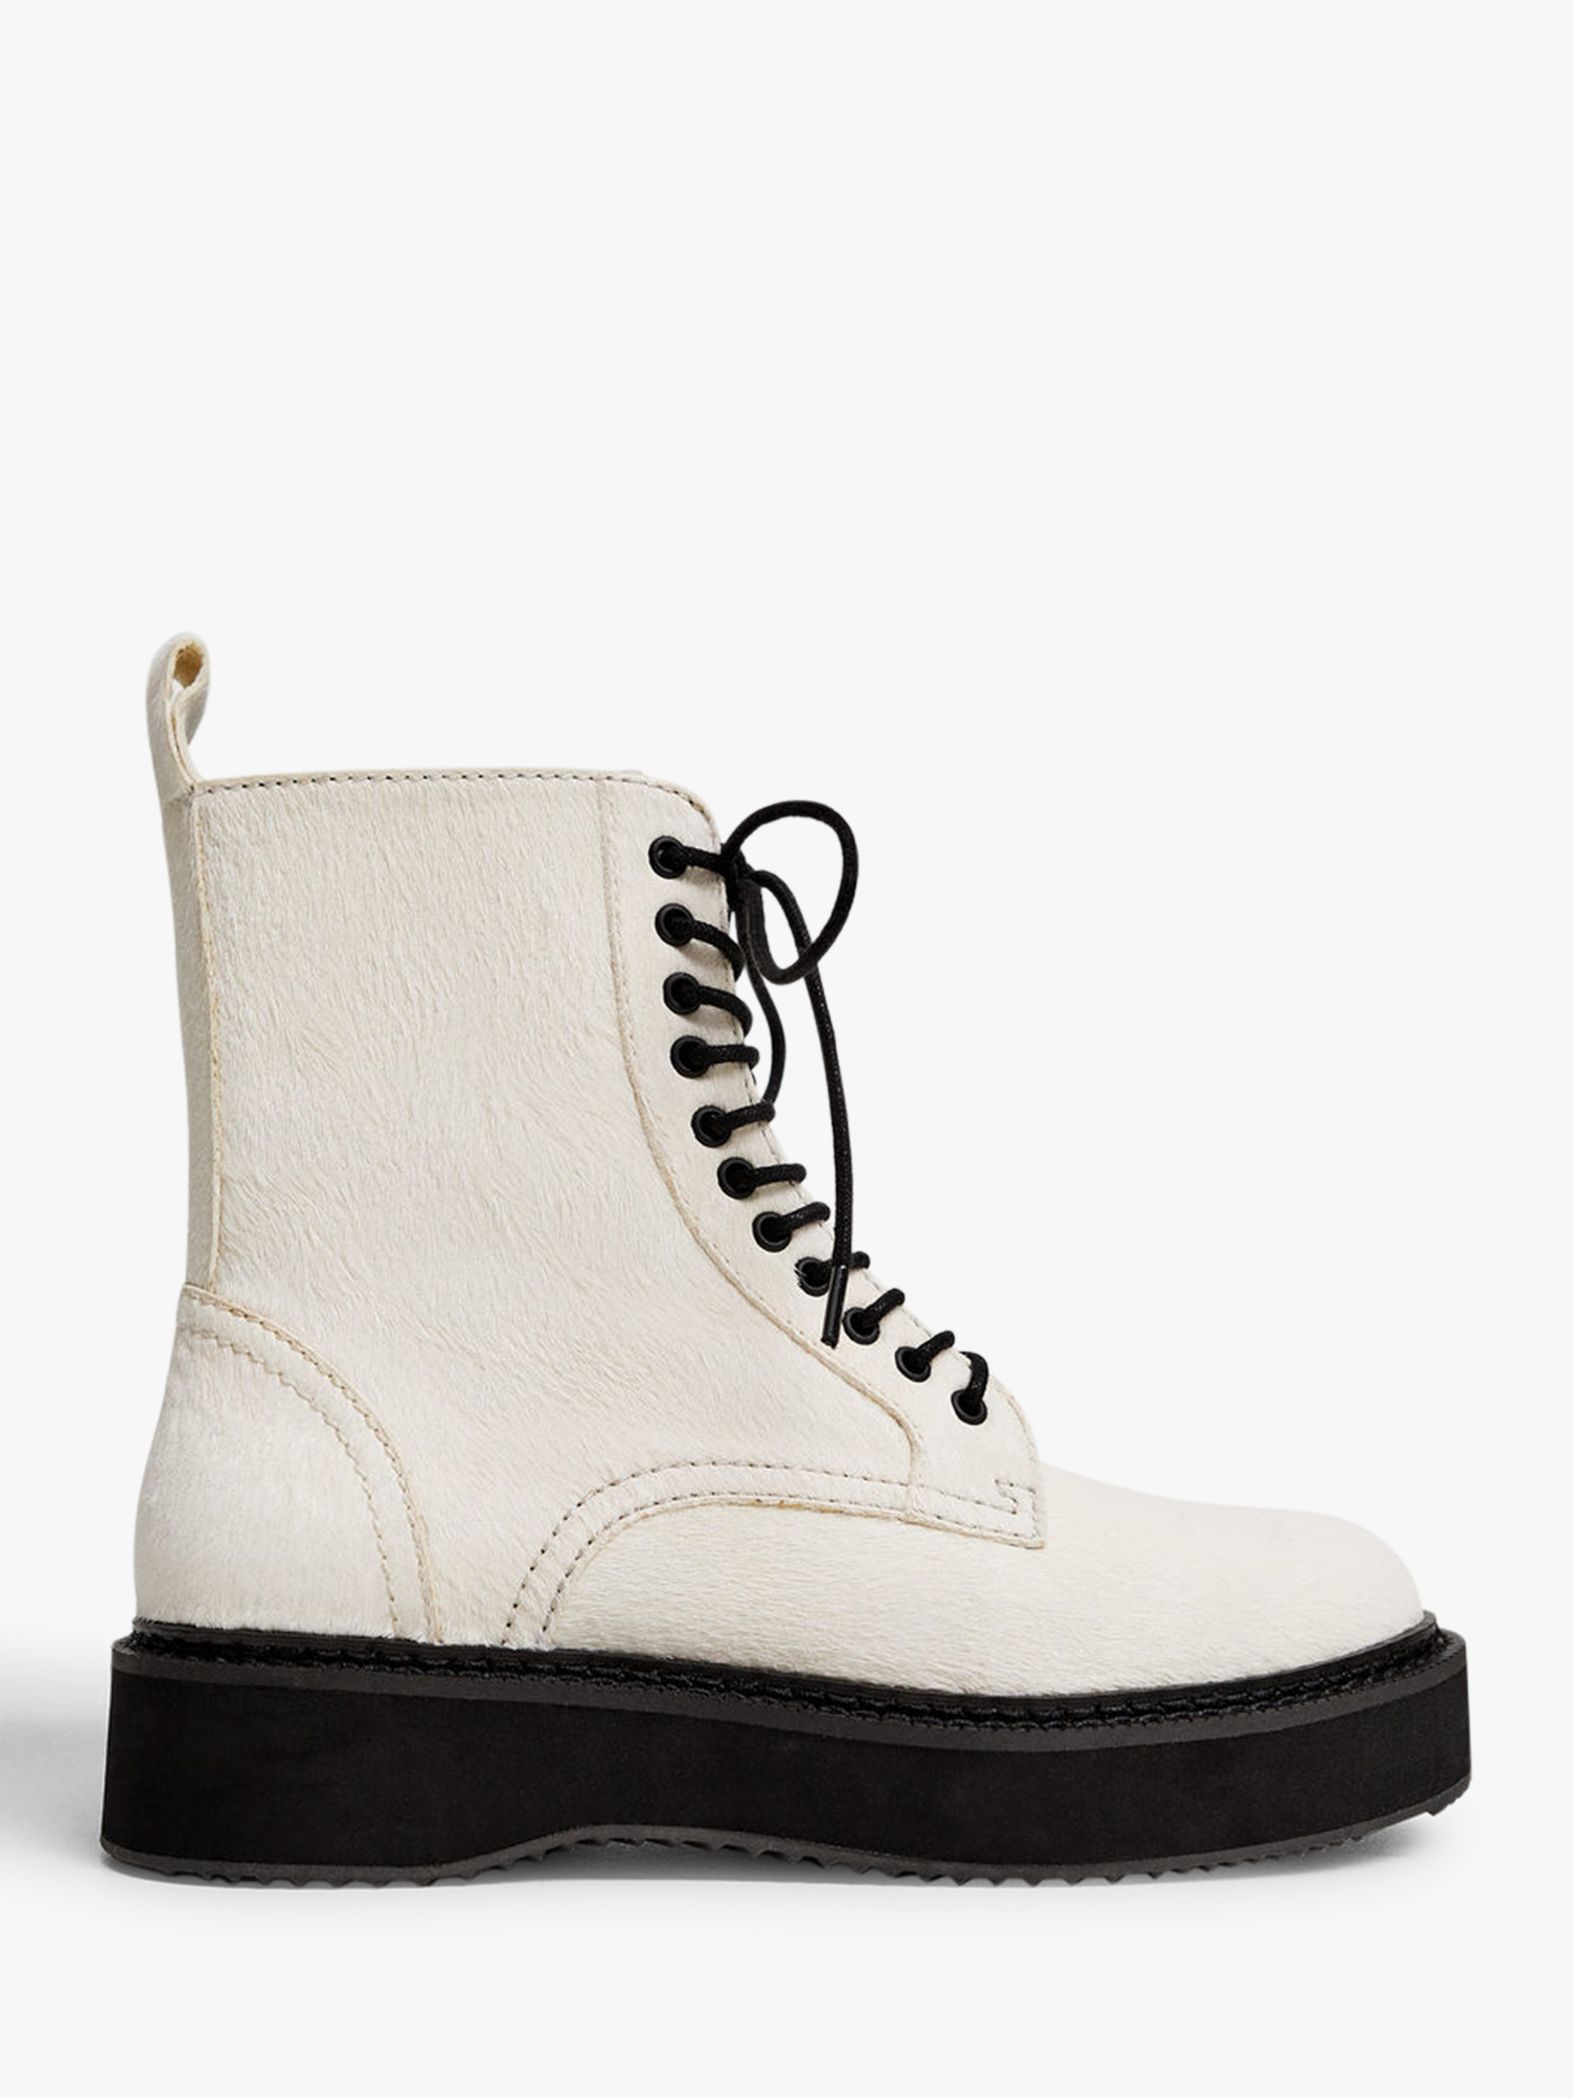 Mango Lace Up Leather Ankle Boots, White at John Lewis & Partners